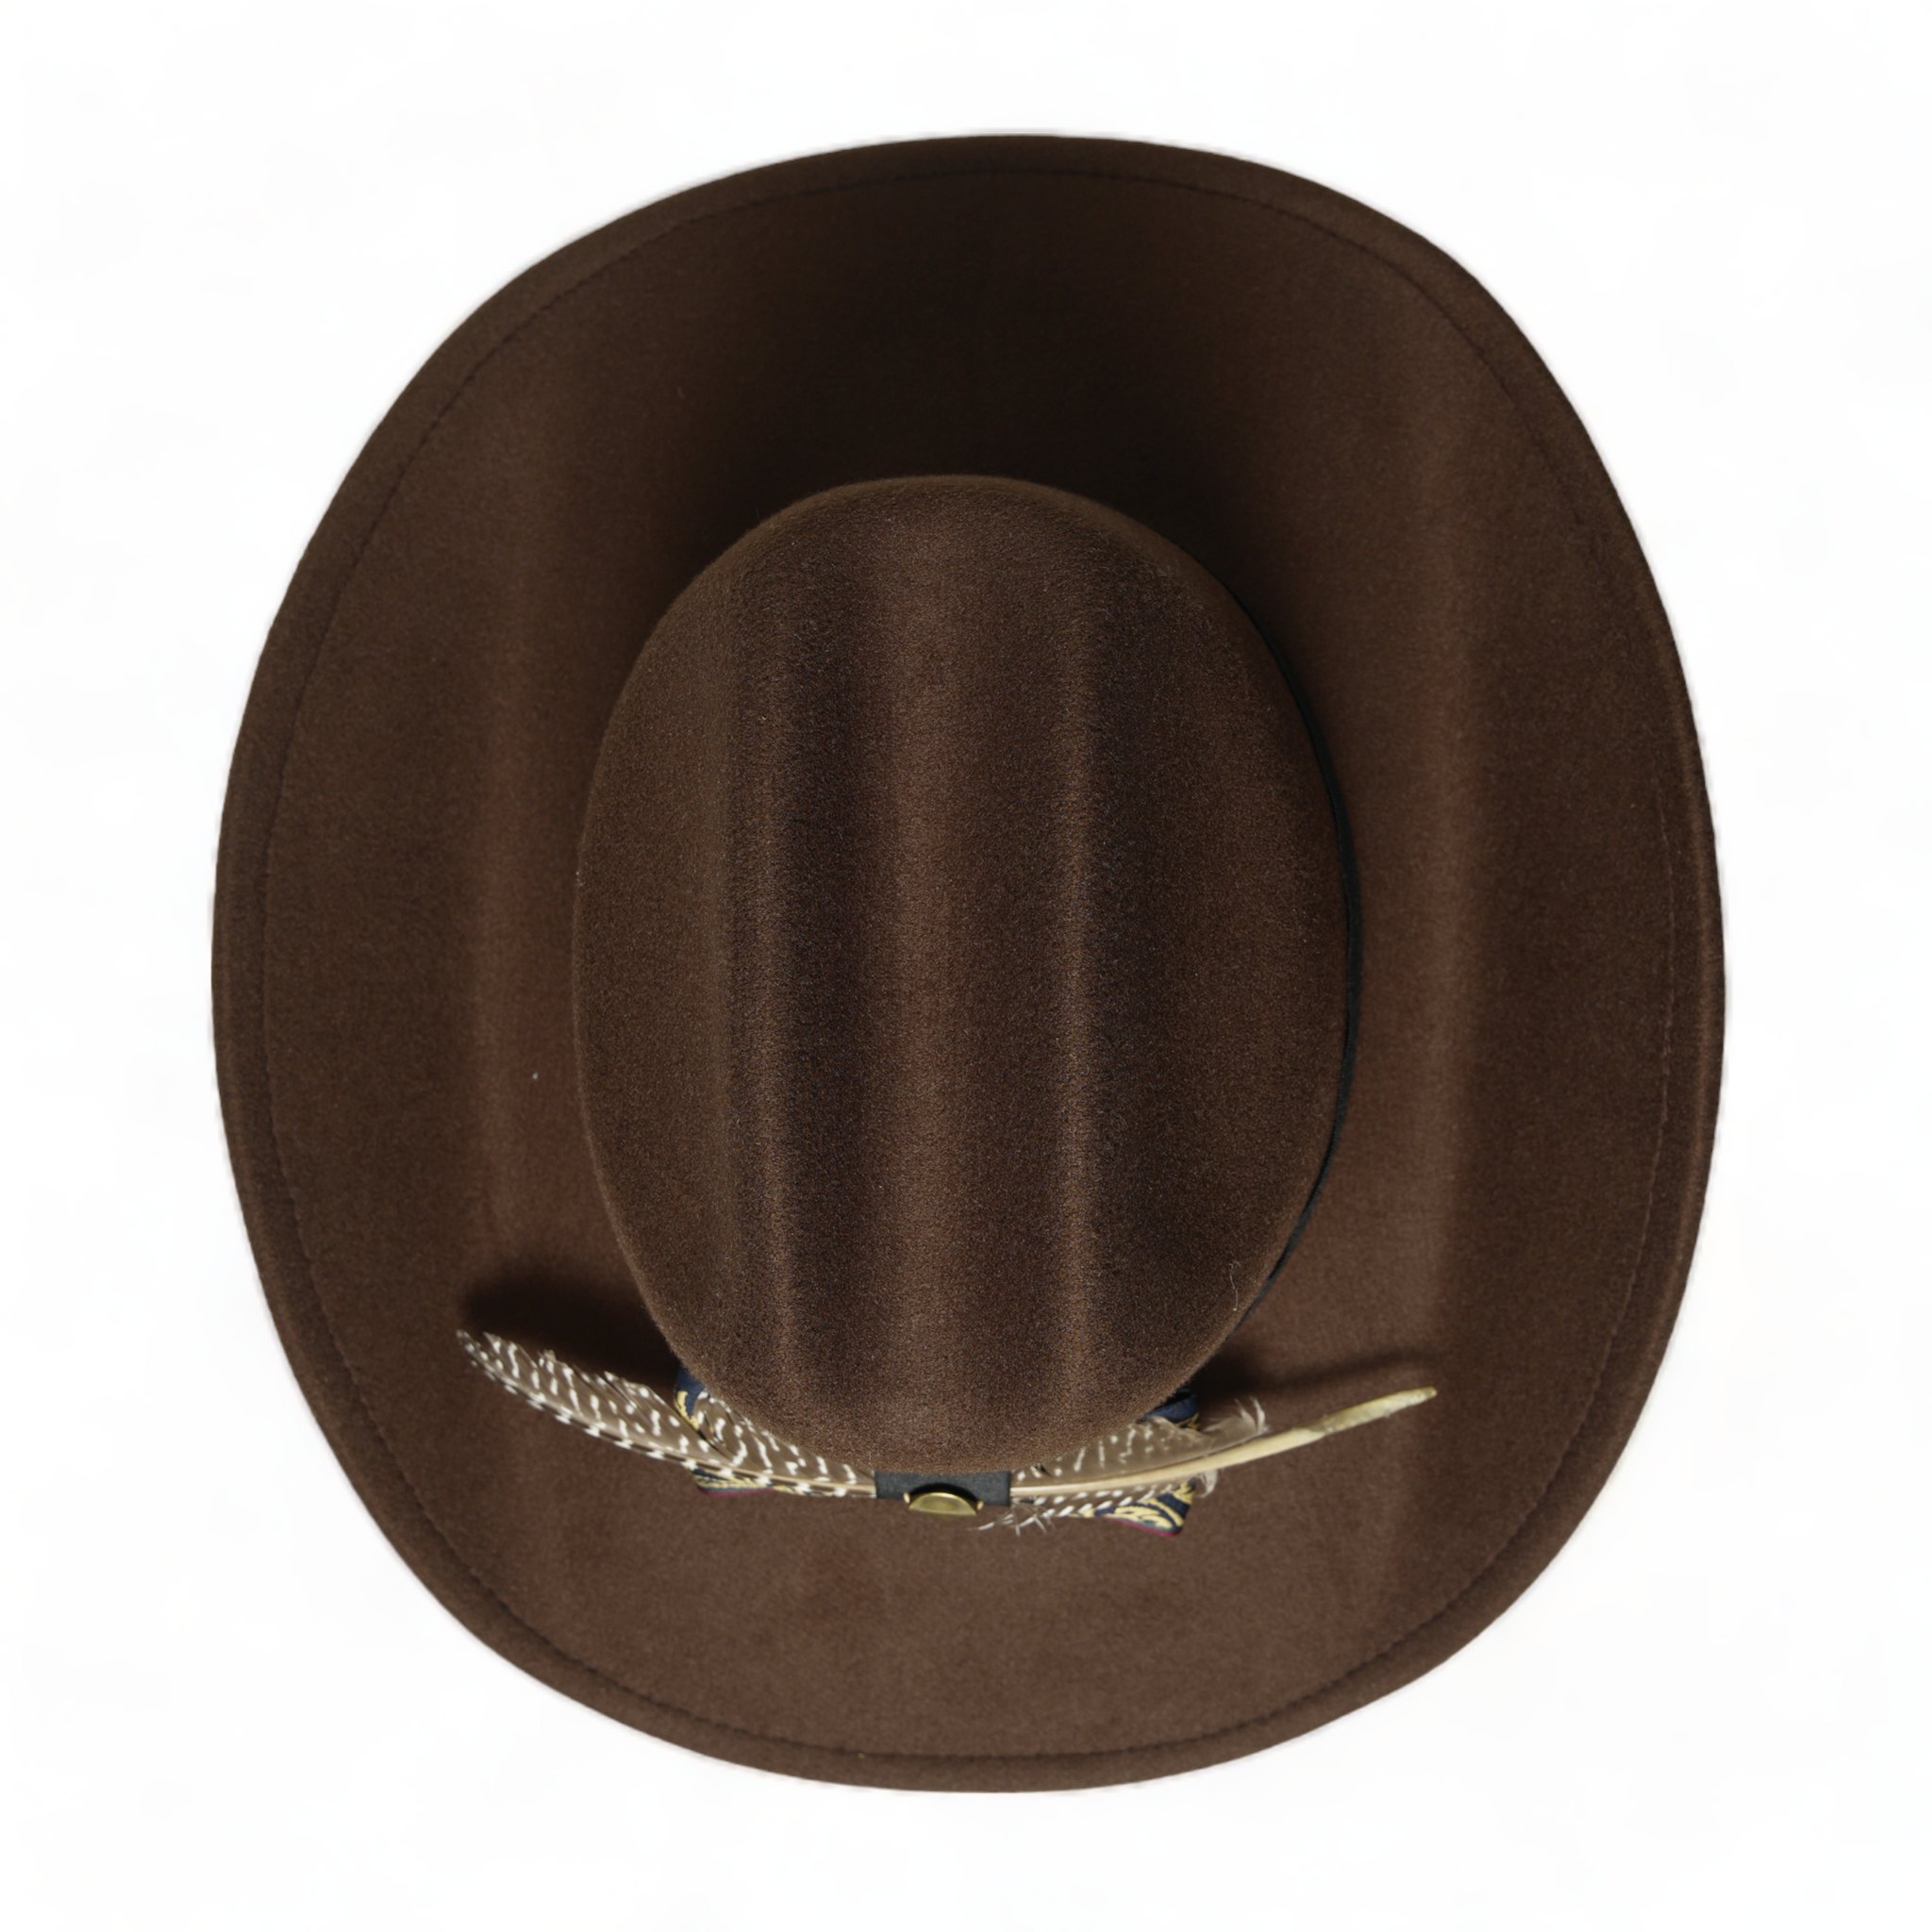 Chokore Cattleman Cowboy Hat with Feather Ribbon (Brown)